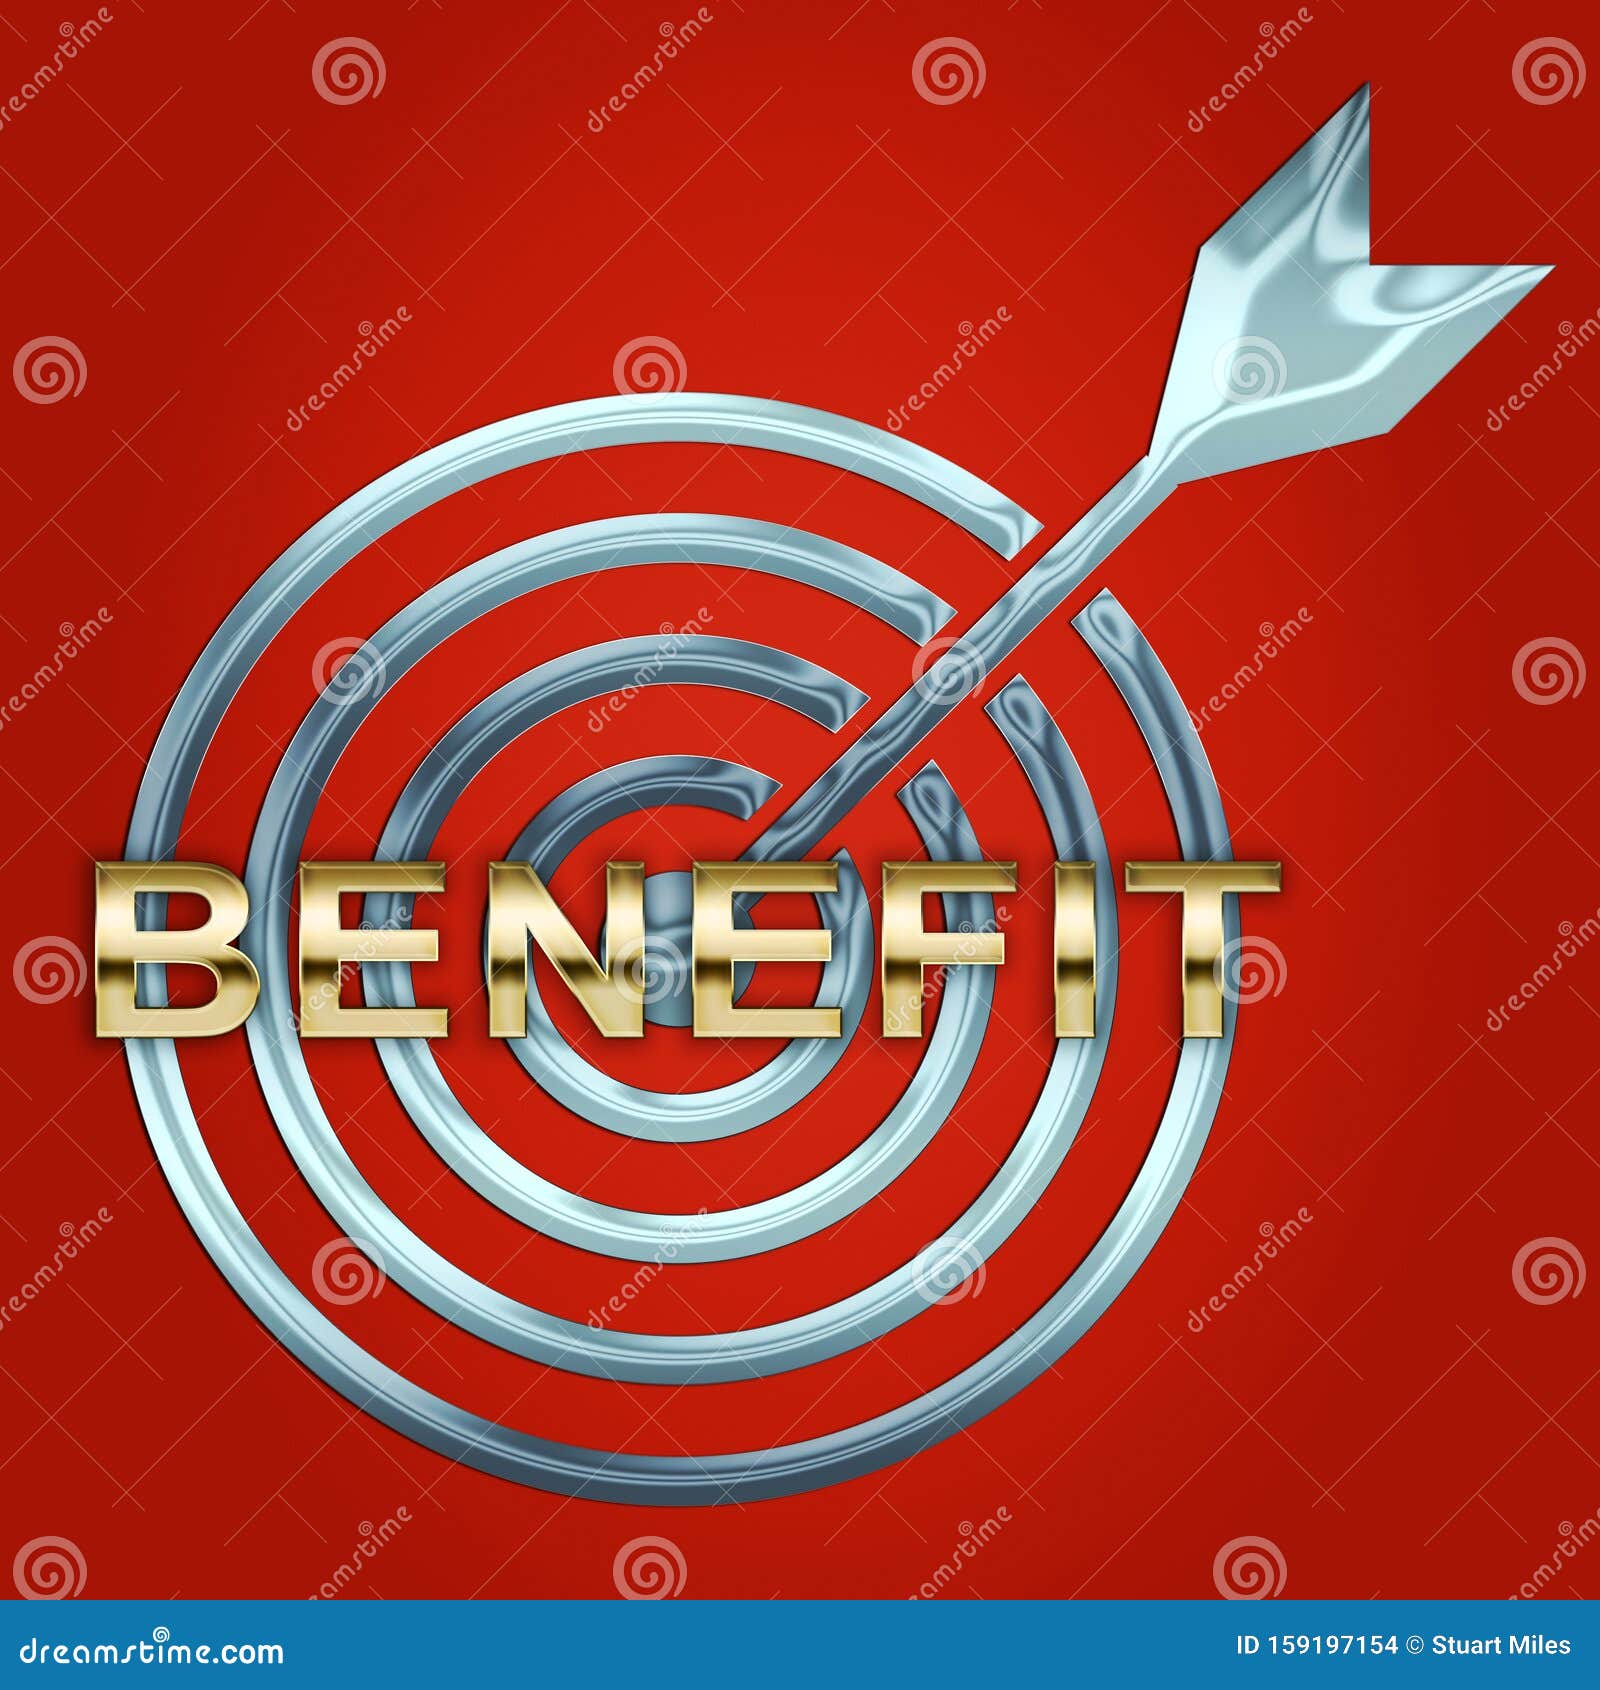 benefit versus cost target means value gained over money spent - 3d 